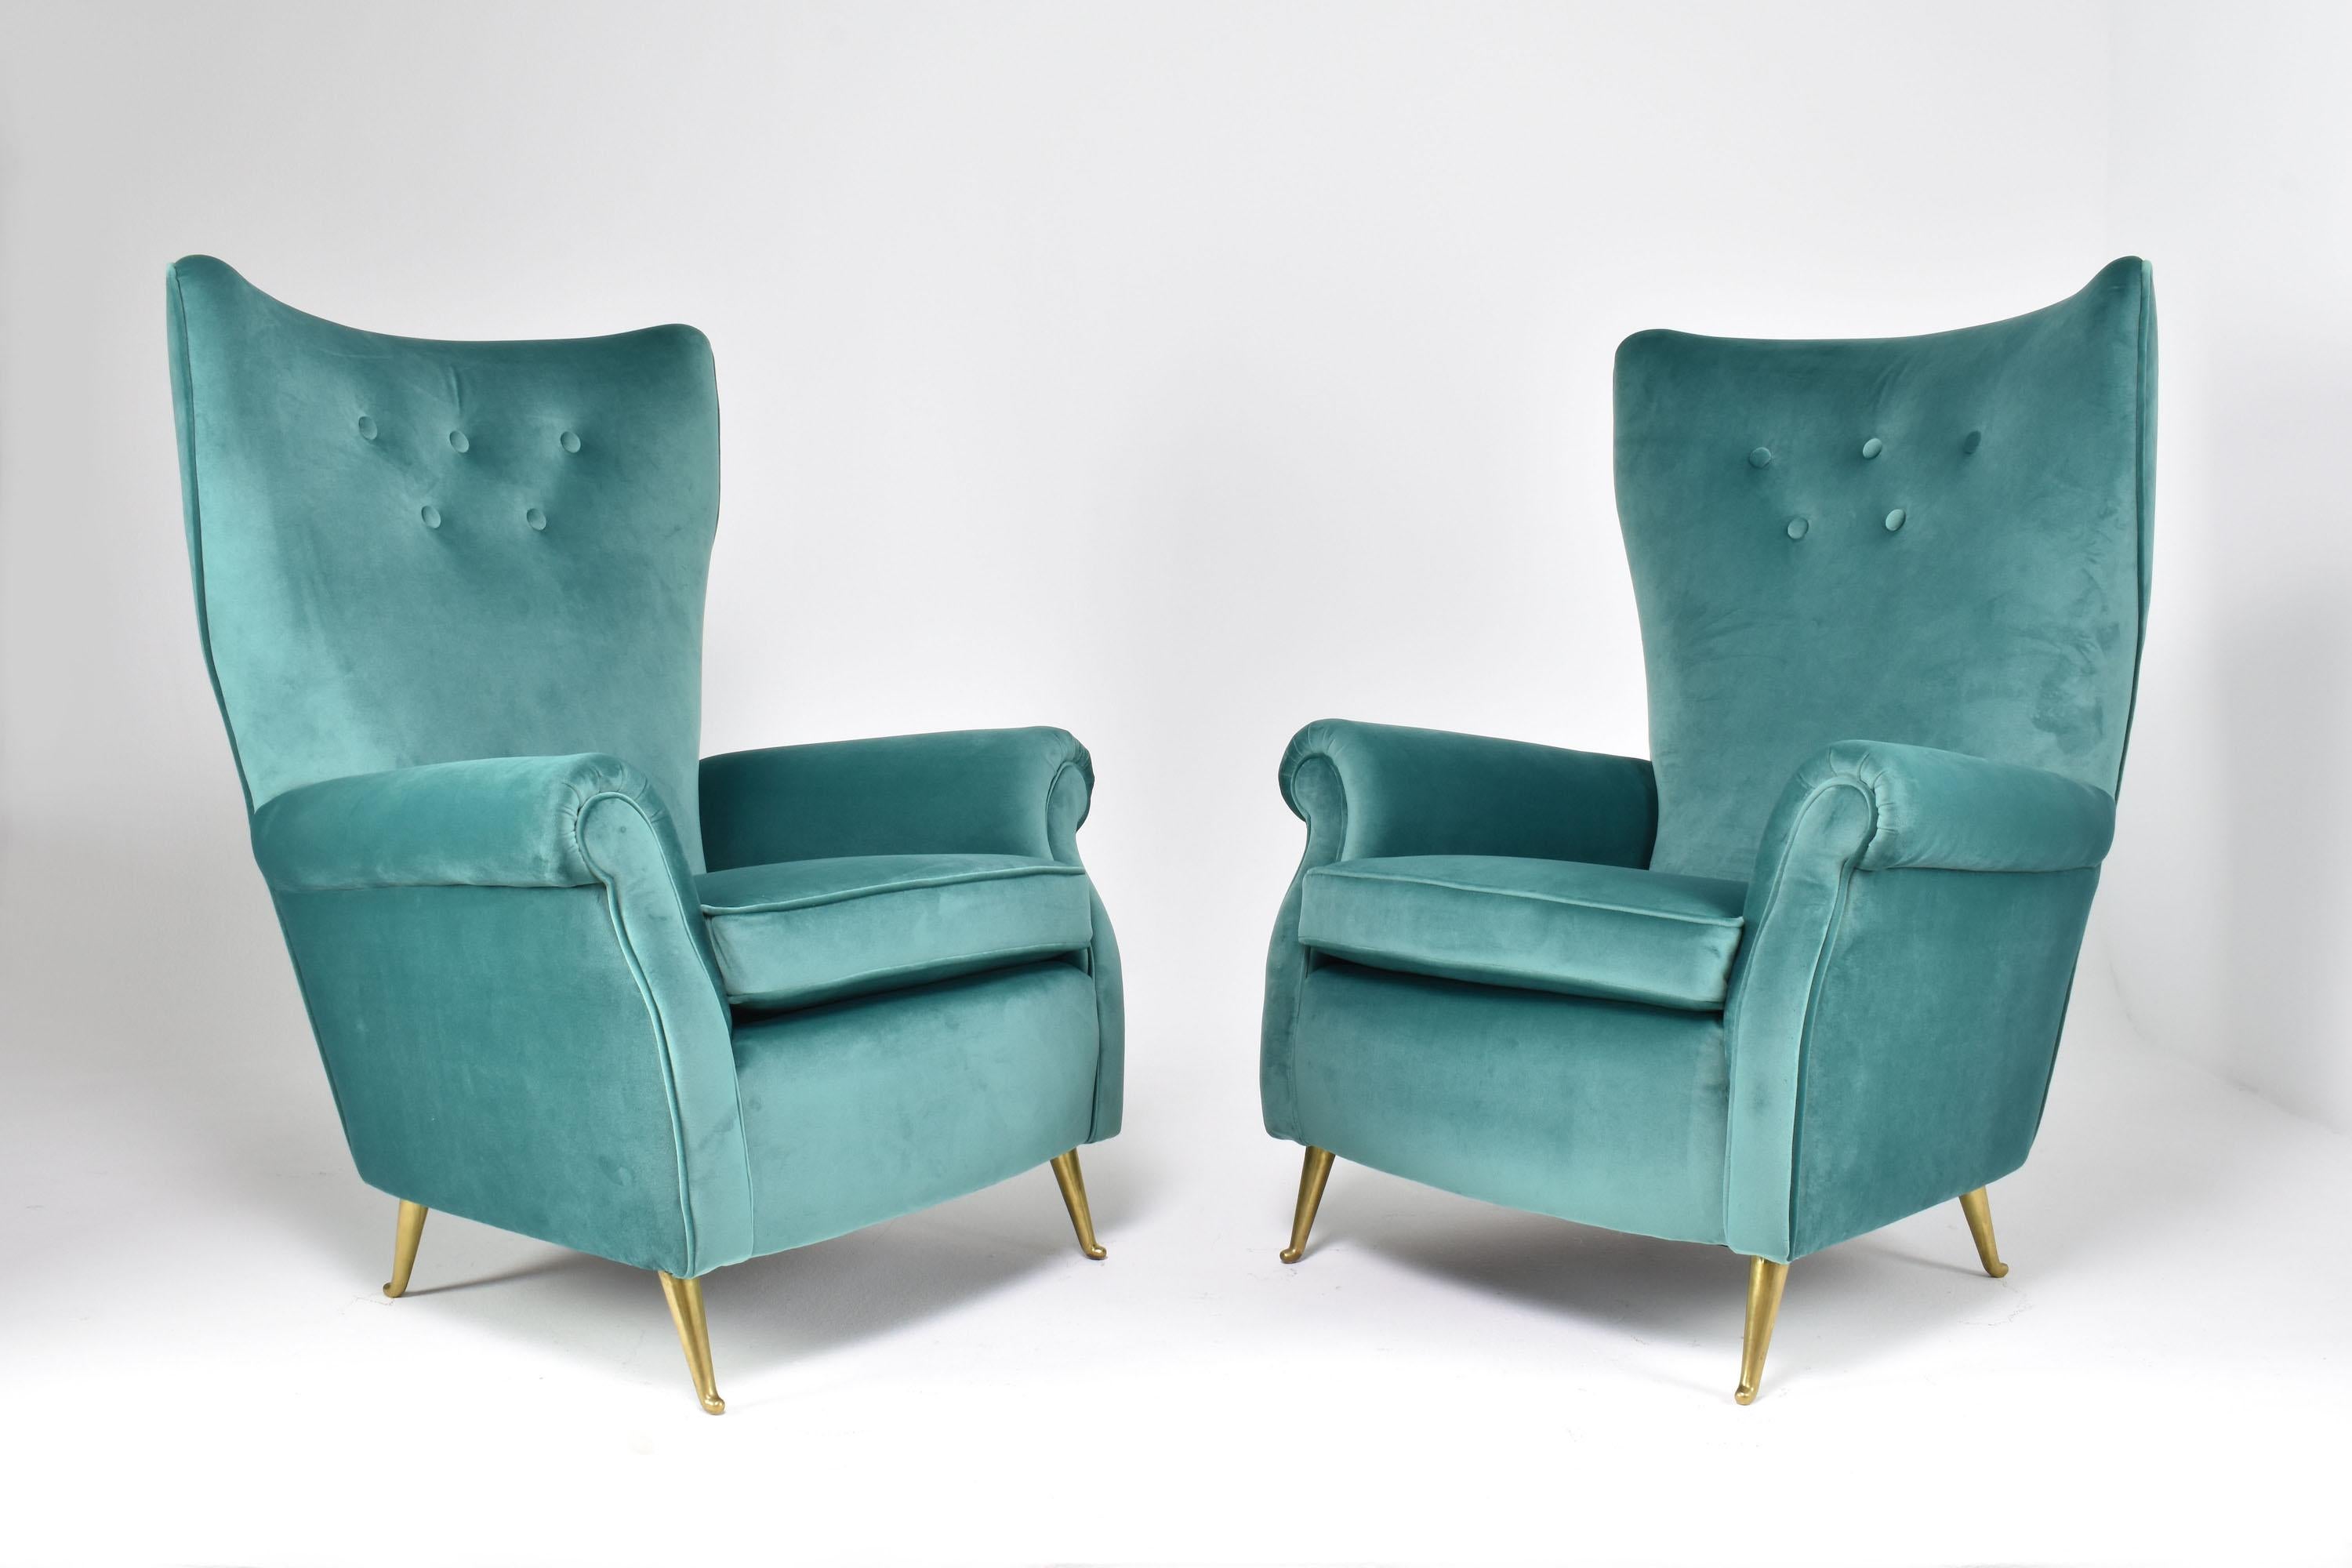 ISA Bergamo is a renowned Italian furniture manufacturer of the 20th century known for its exceptional craftsmanship and dedication to producing high-quality pieces. This pair of 20th-century vintage Italian club armchairs are a testament to the